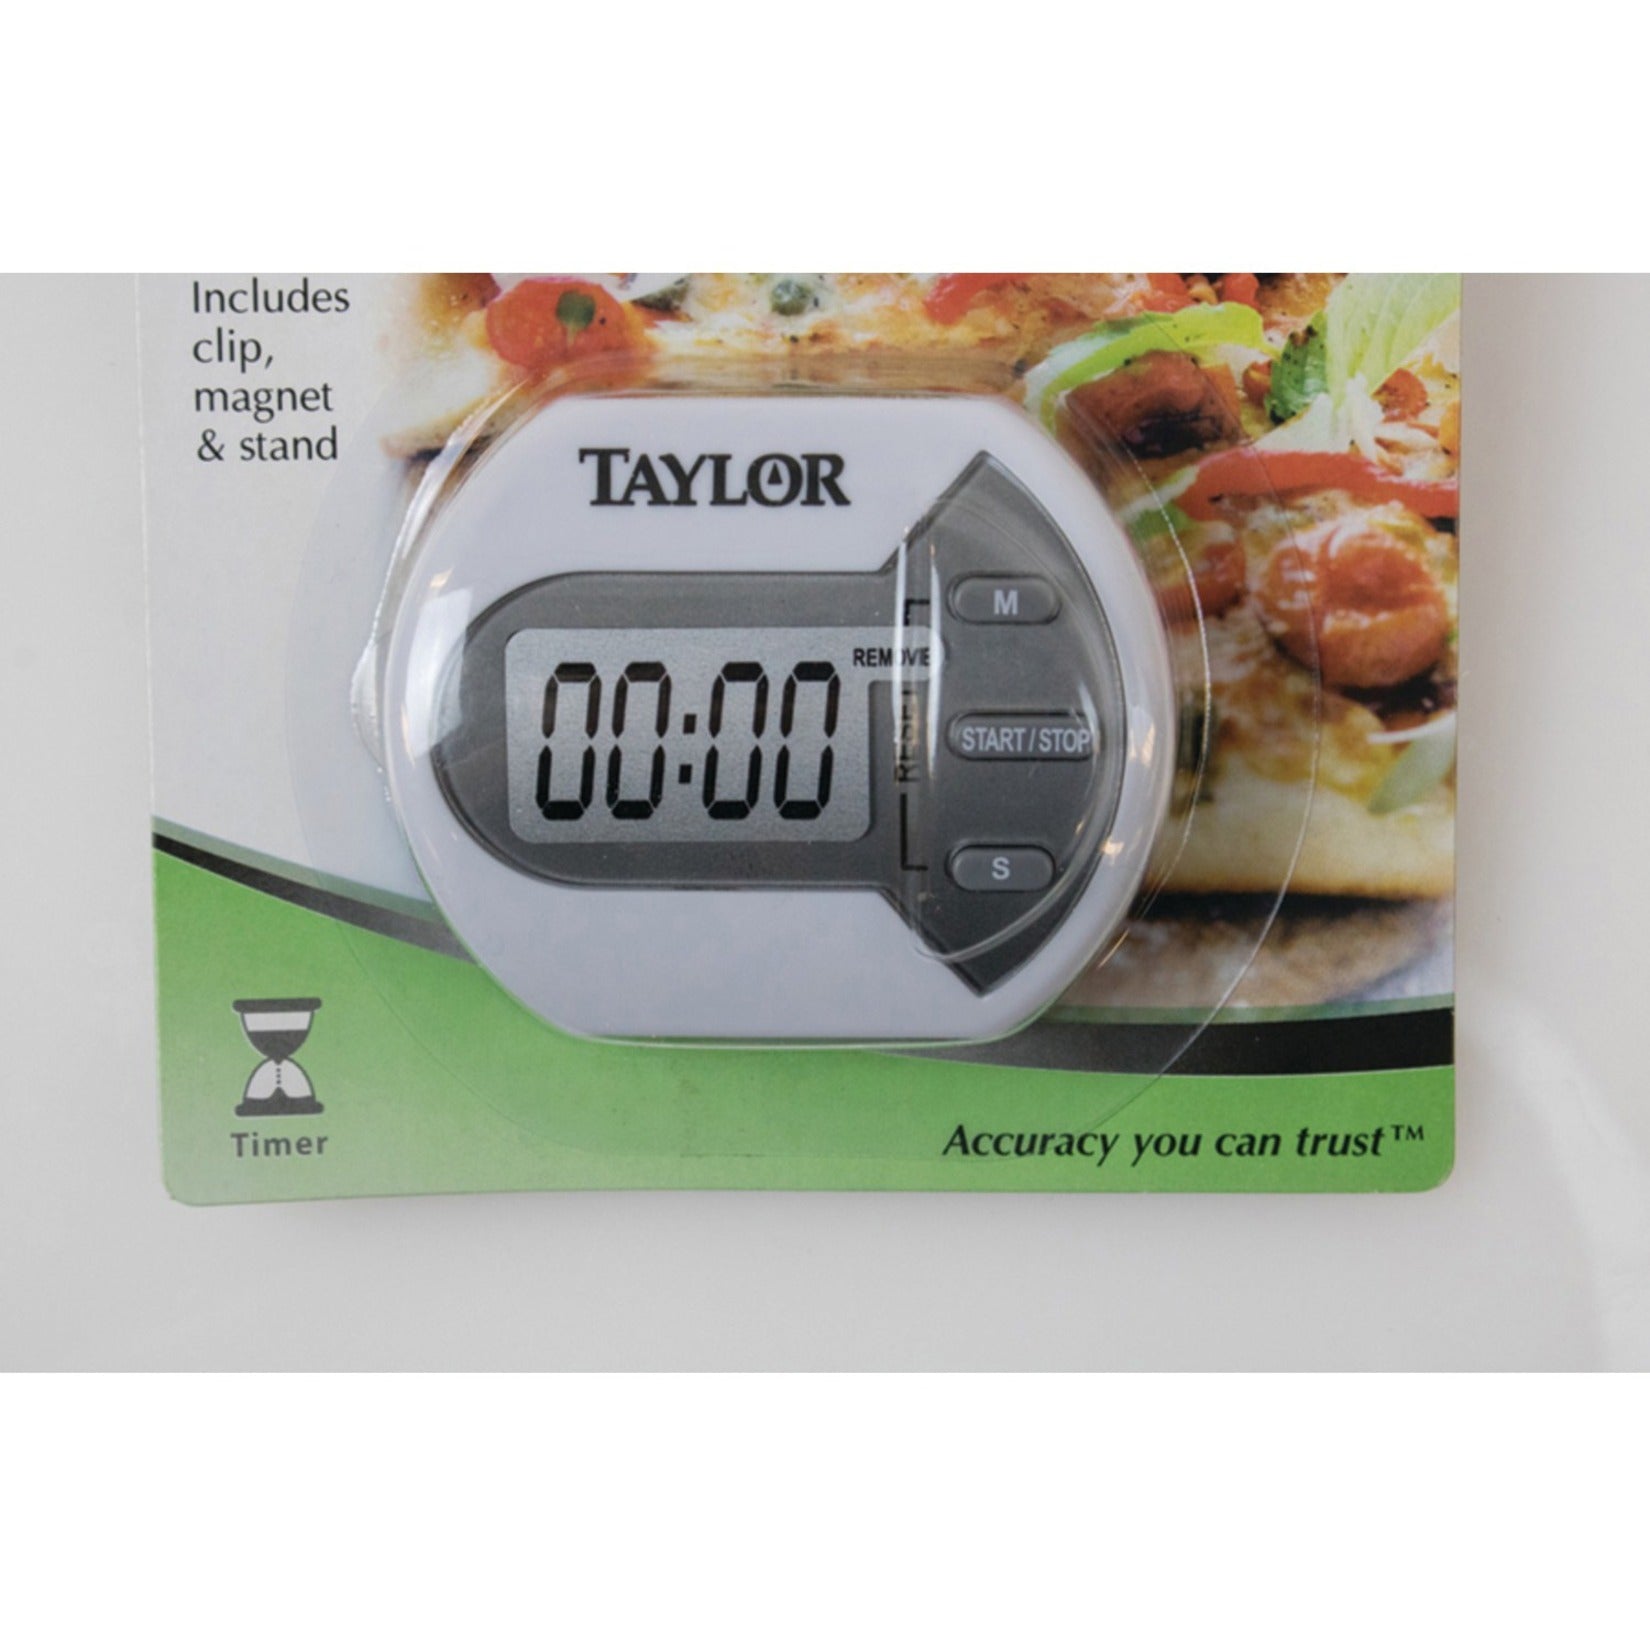 Taylor 5806 Digital Timer, LCD Display, Count Down/Count Up